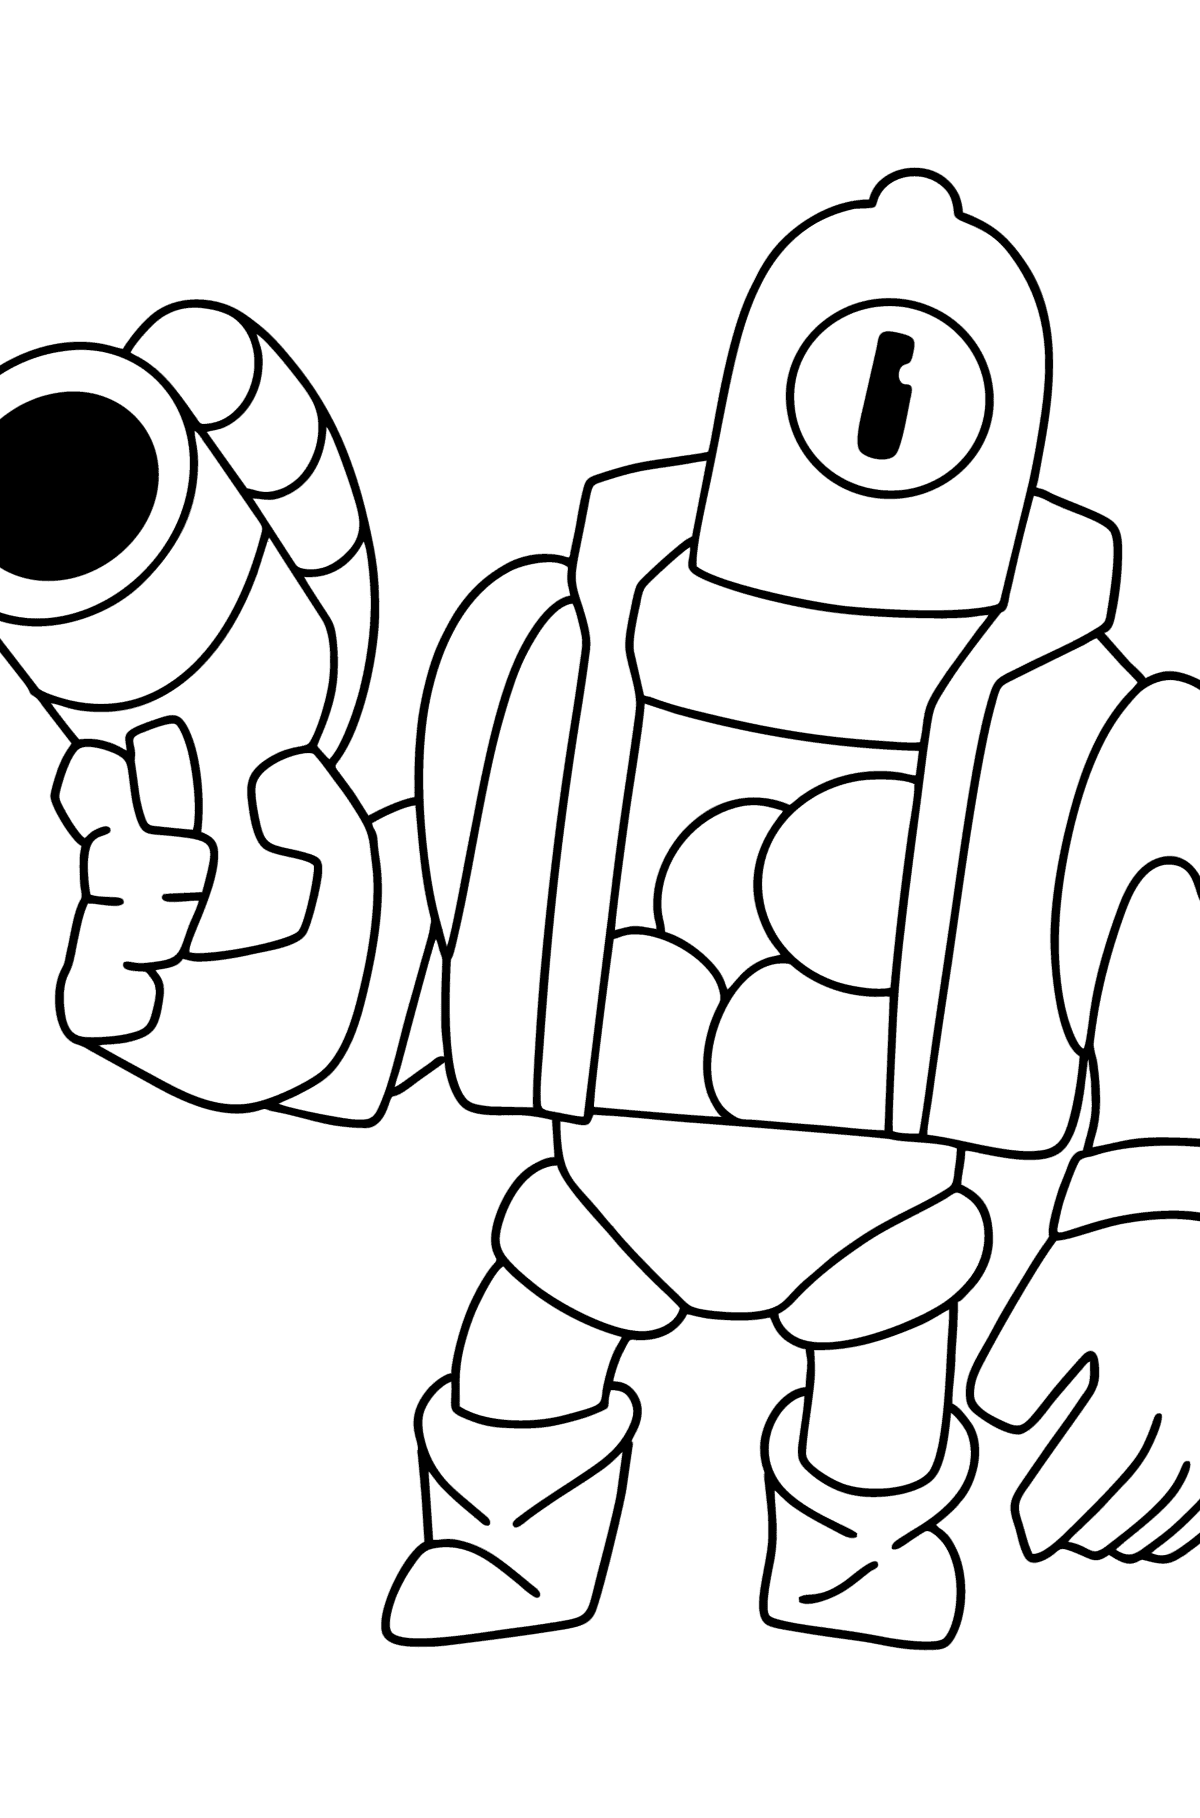 Brawl Stars Ricochet coloring page - Coloring Pages for Kids